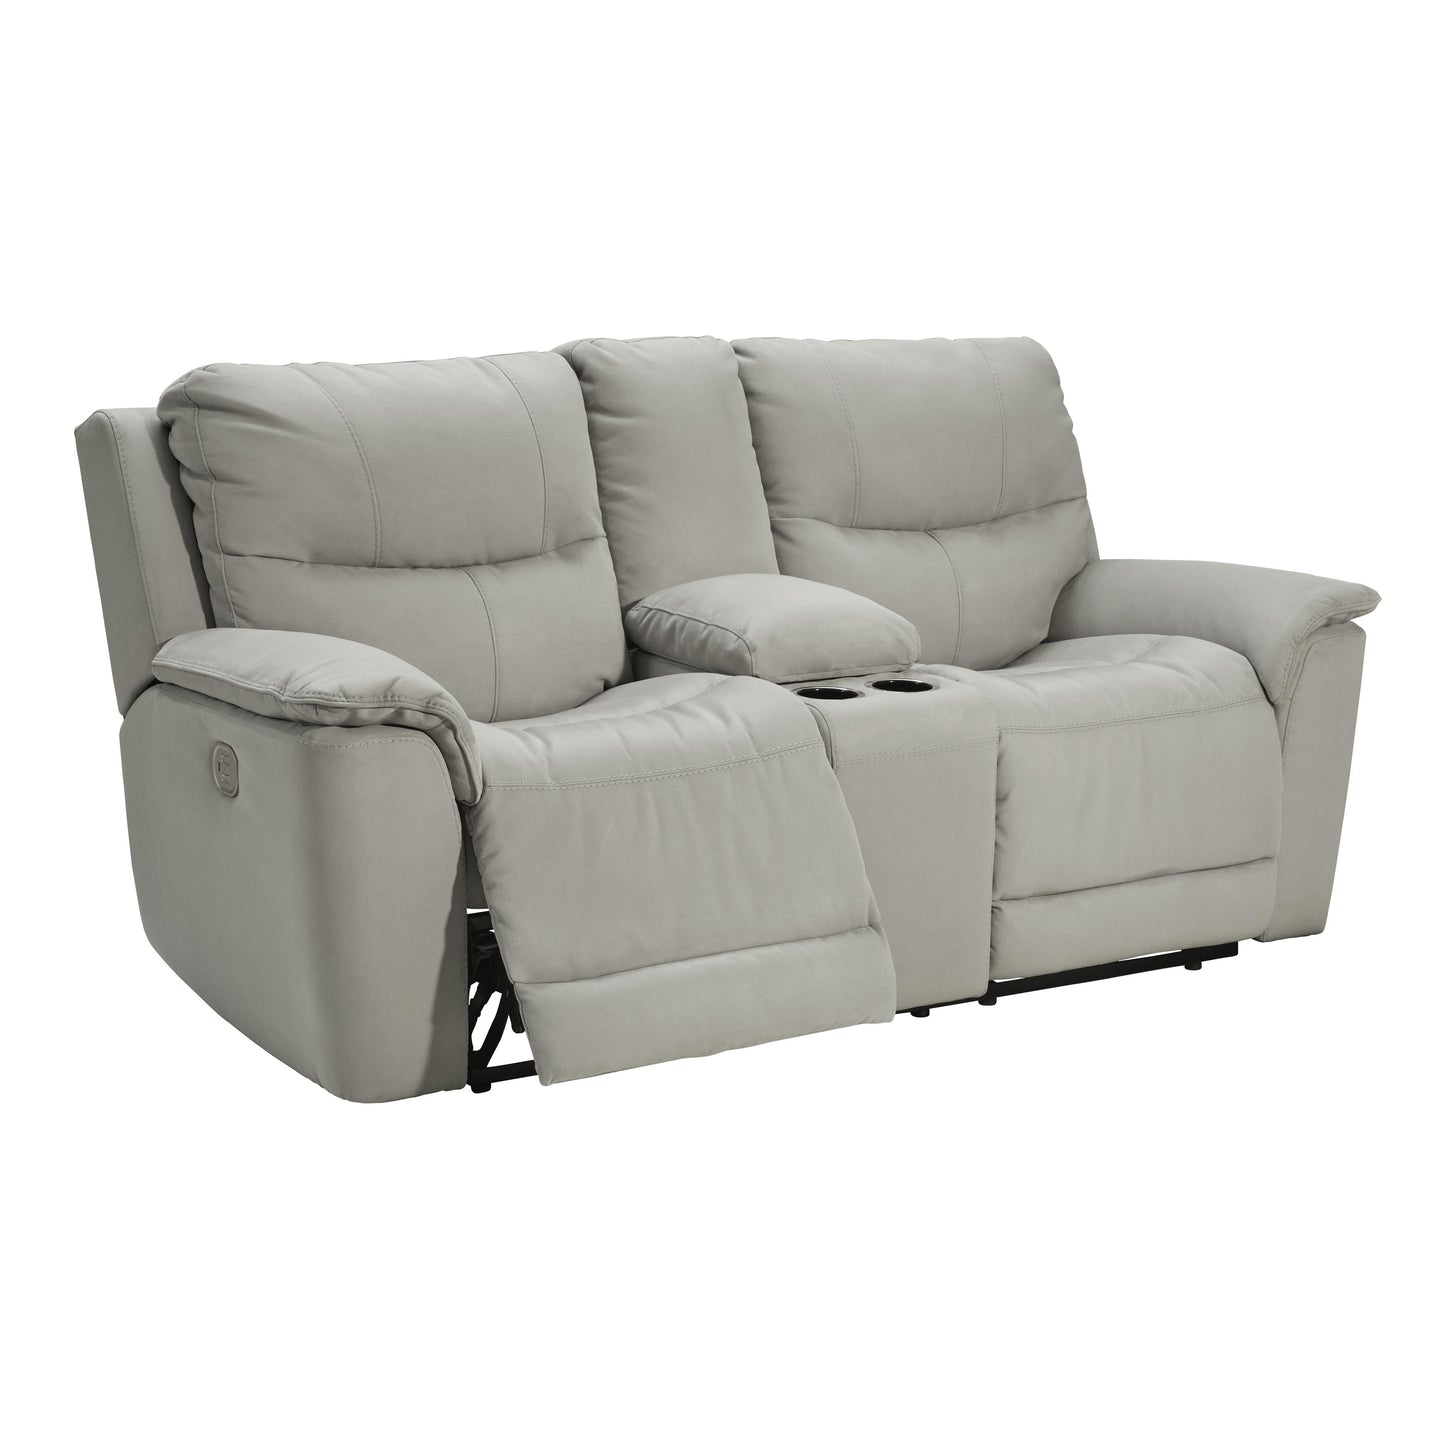 Signature Design by Ashley Next-Gen Gaucho Power Reclining Leather Look Loveseat 6080618 IMAGE 2